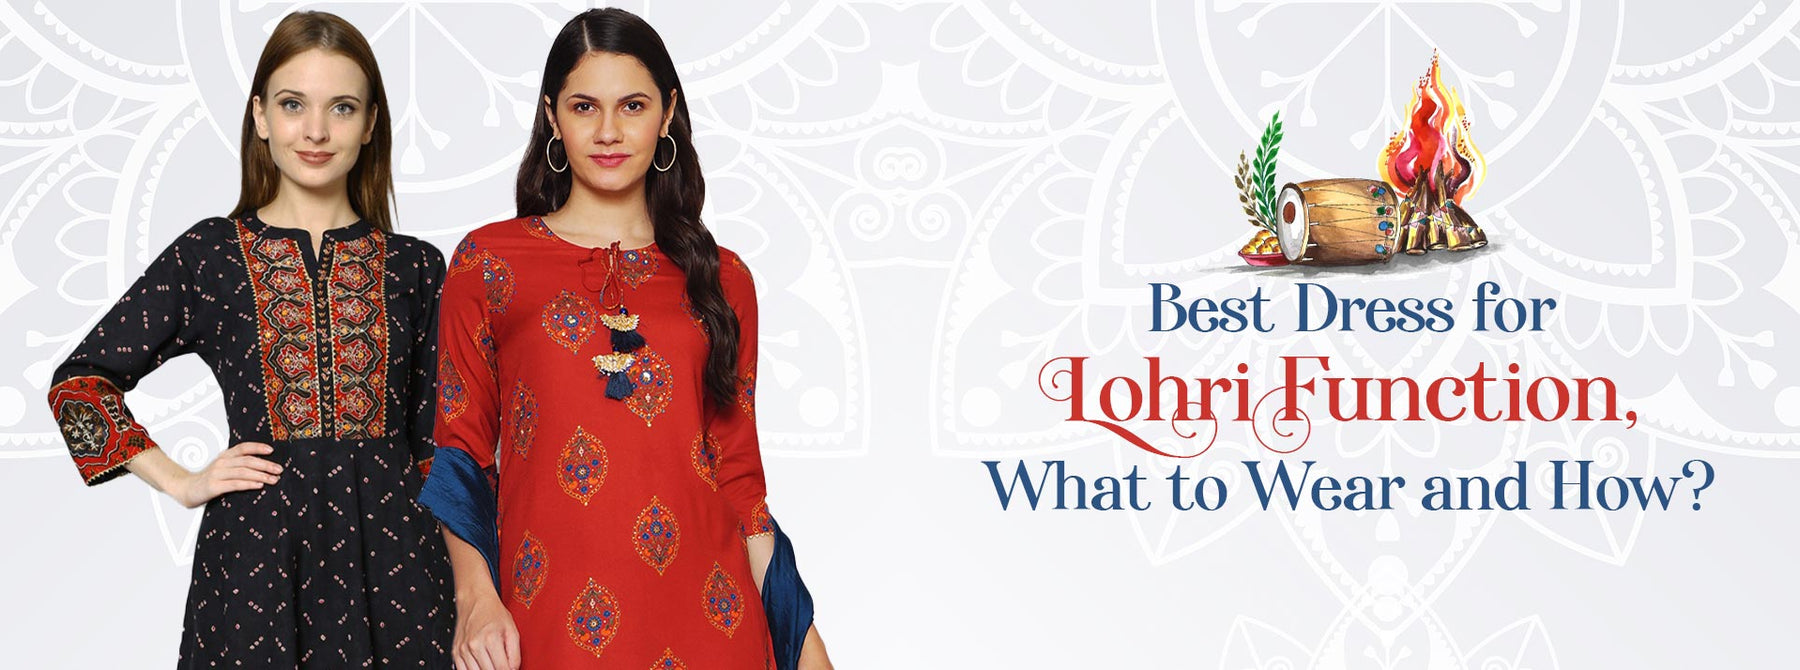 Best Dress for Lohri Function, What to Wear and How?